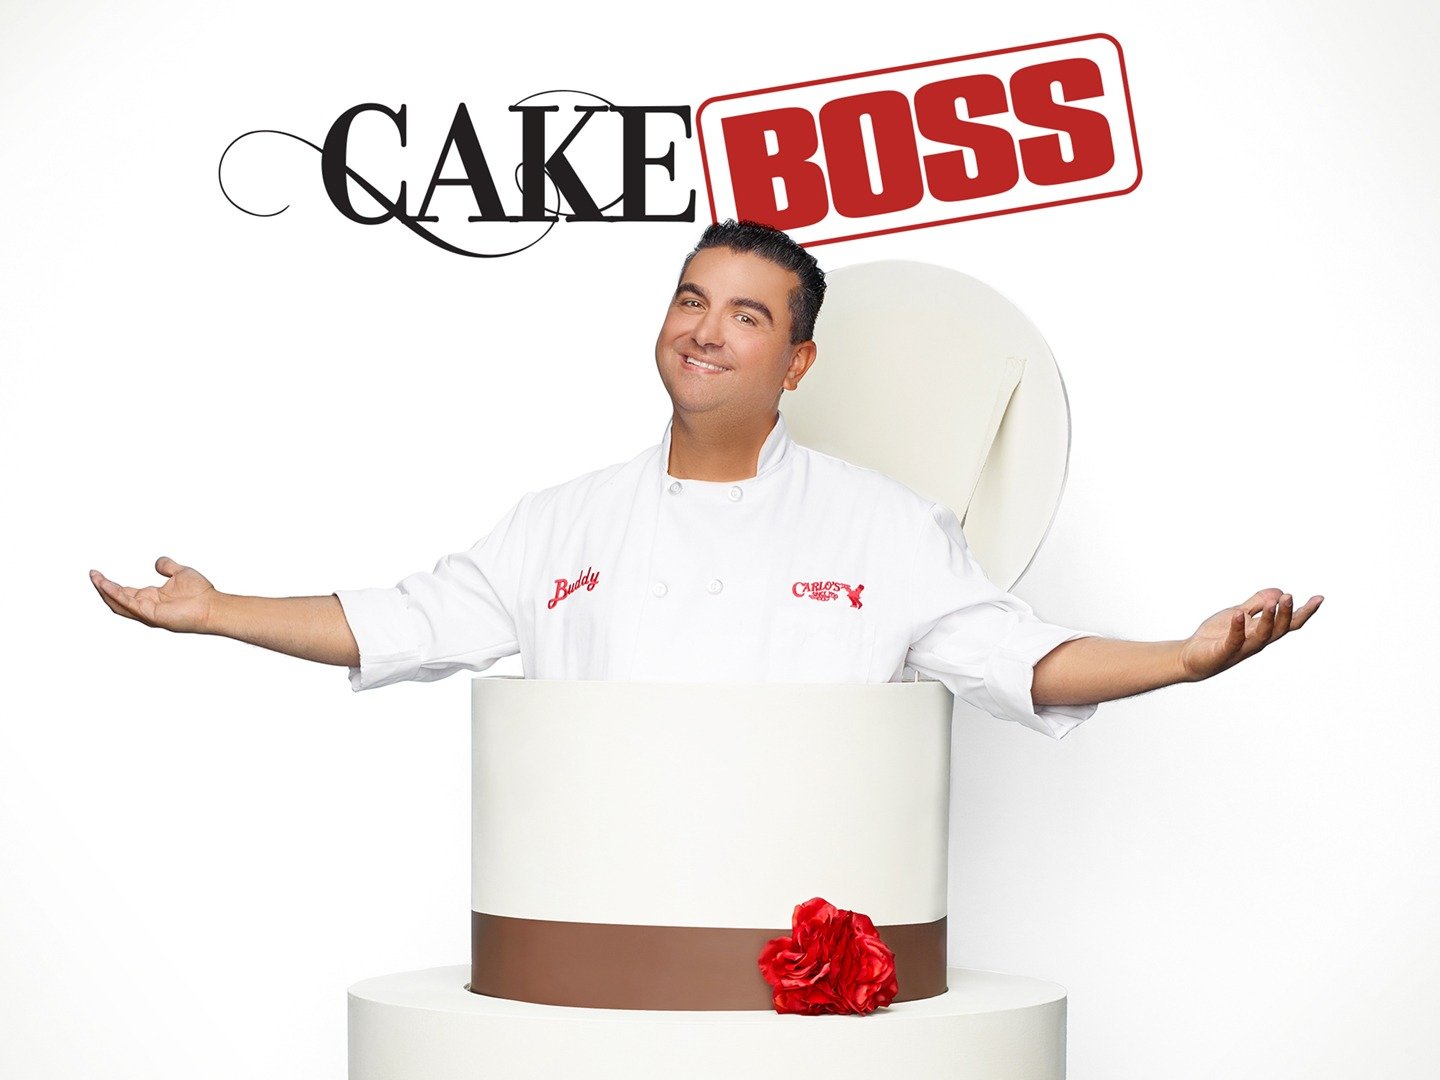 Watch Cake Boss S01:E03 - Bunny, Birthday and Burnt - Free TV Shows | Tubi